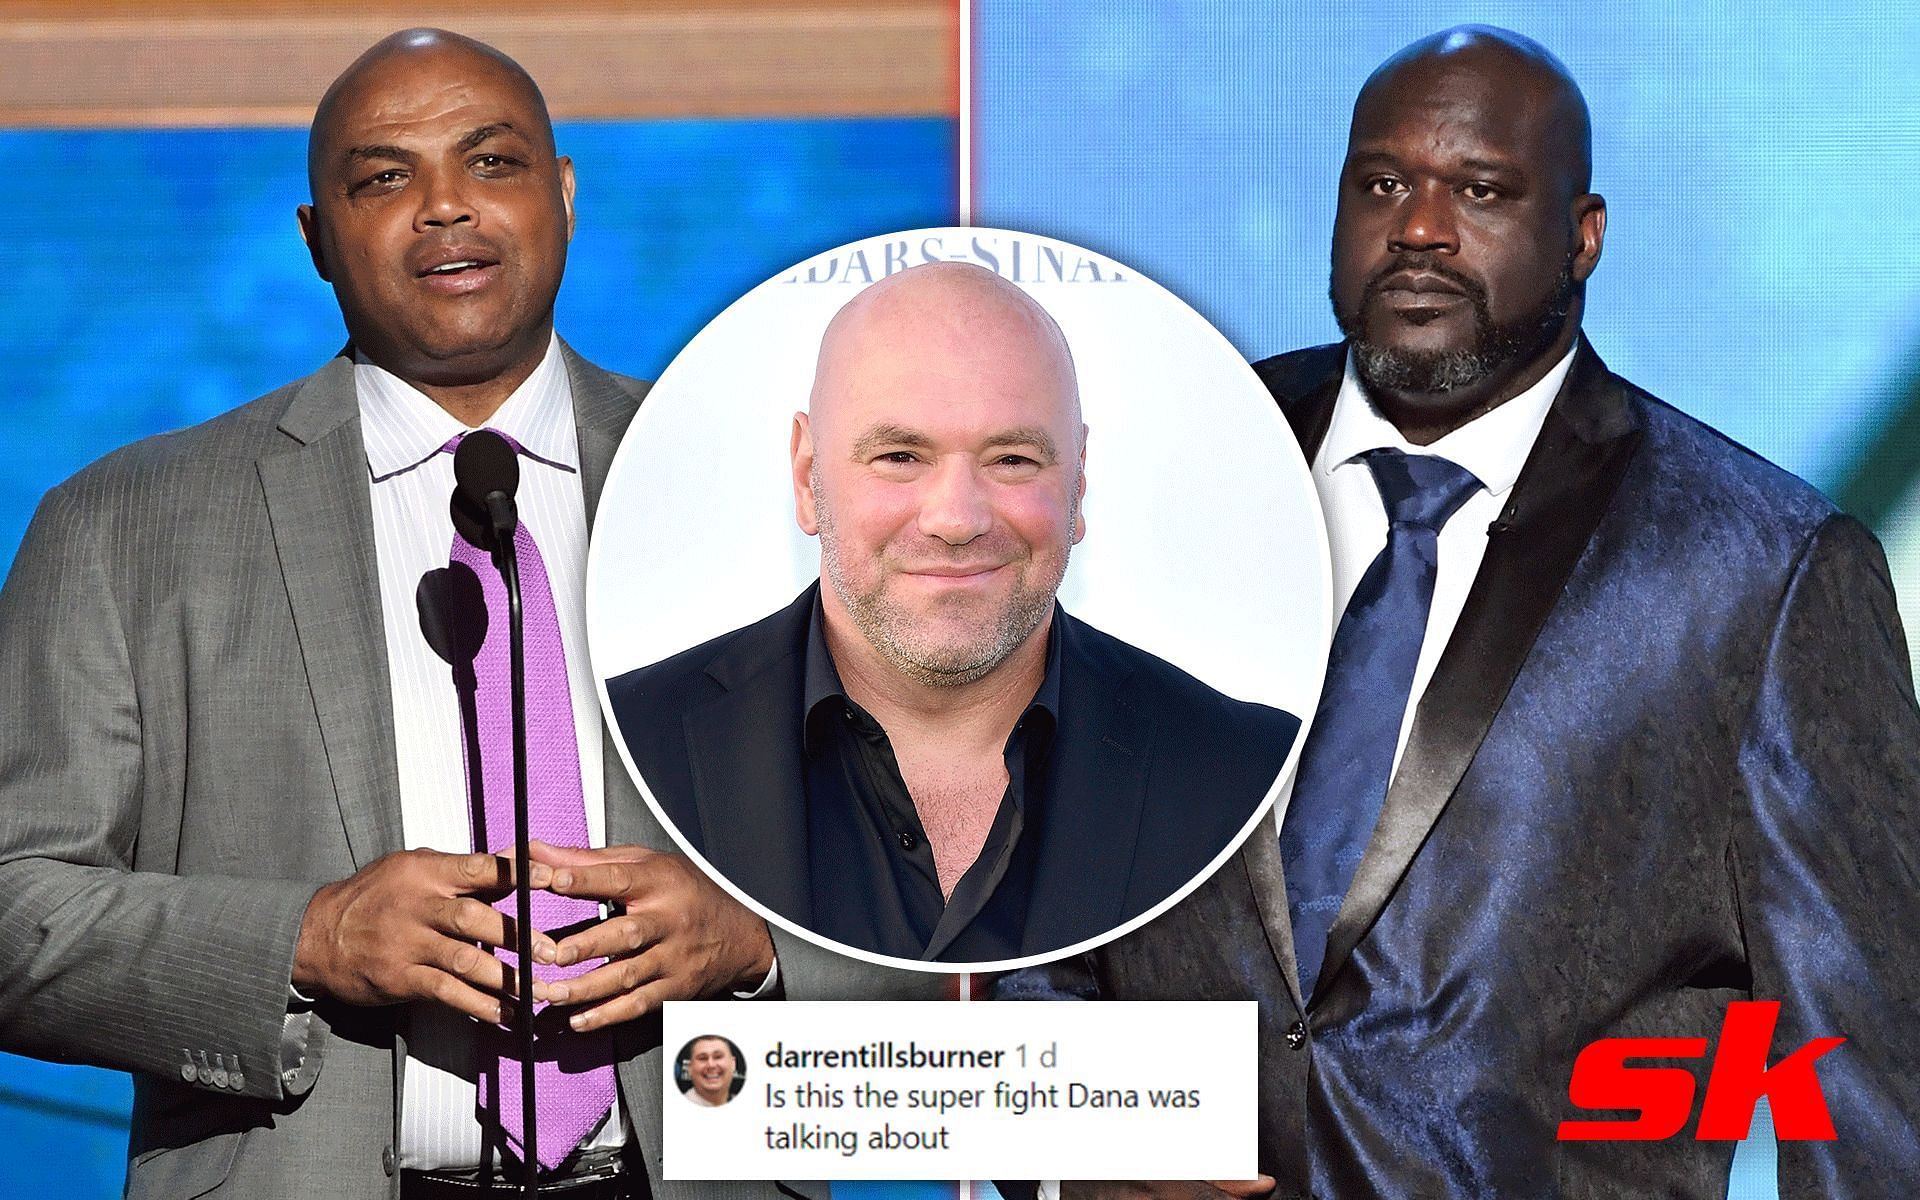 Shaquille O&rsquo;Neal (Left), Dana White (Inset) and Charles Barkley[ (Right) Images via Getty]